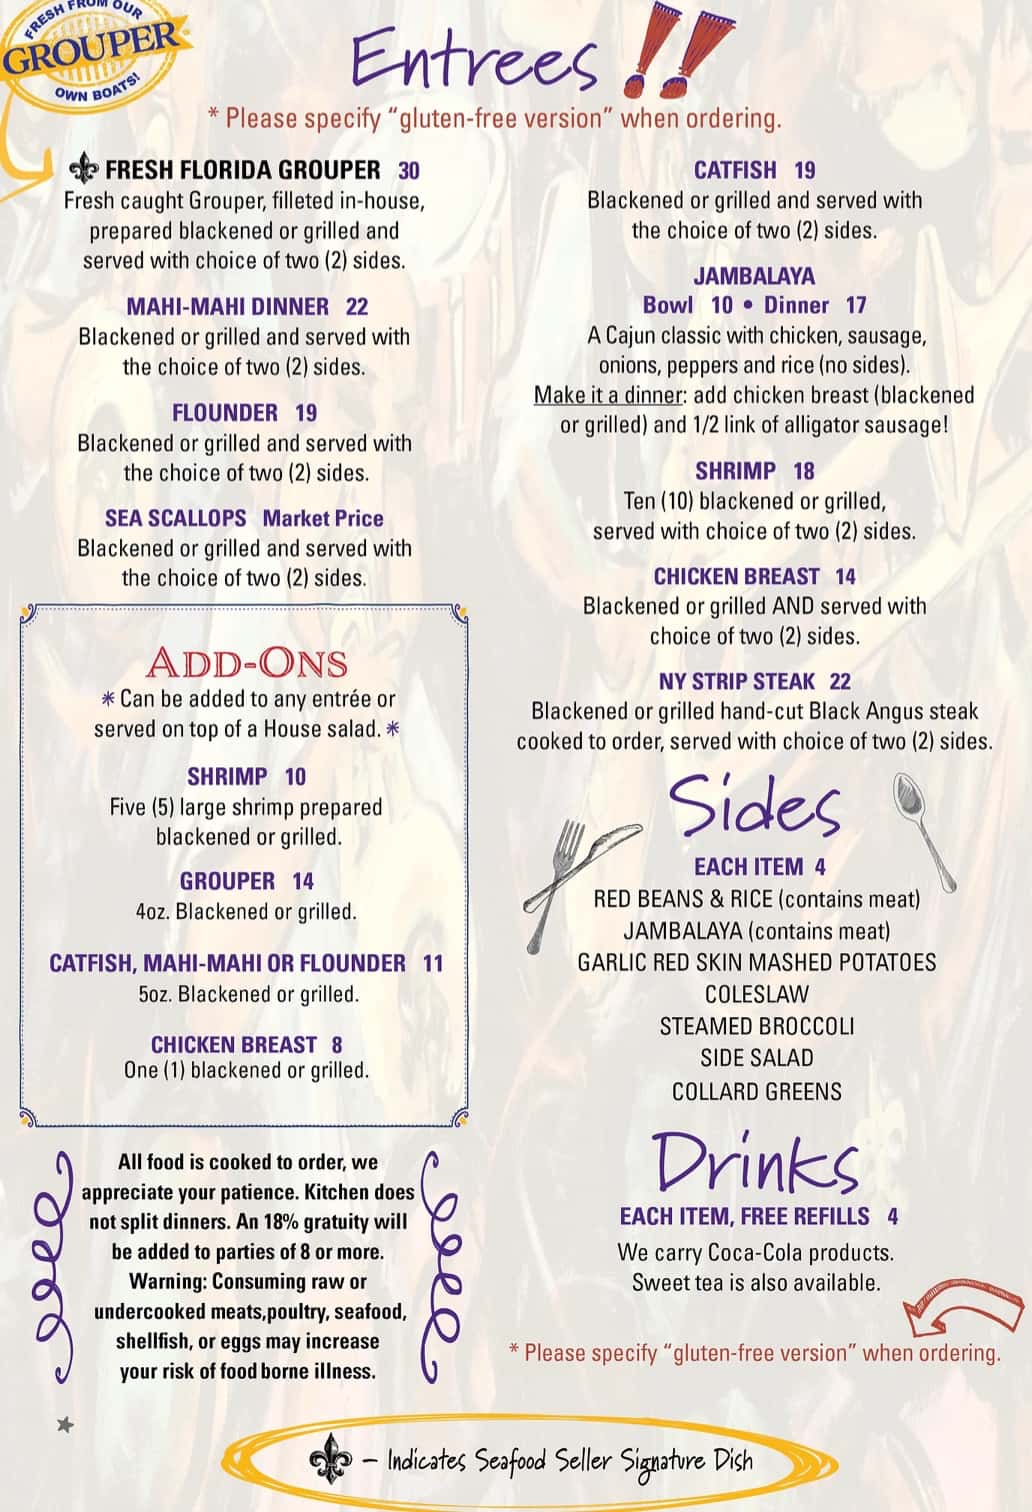 Seafood Seller and Cafe Gluten Free Menu